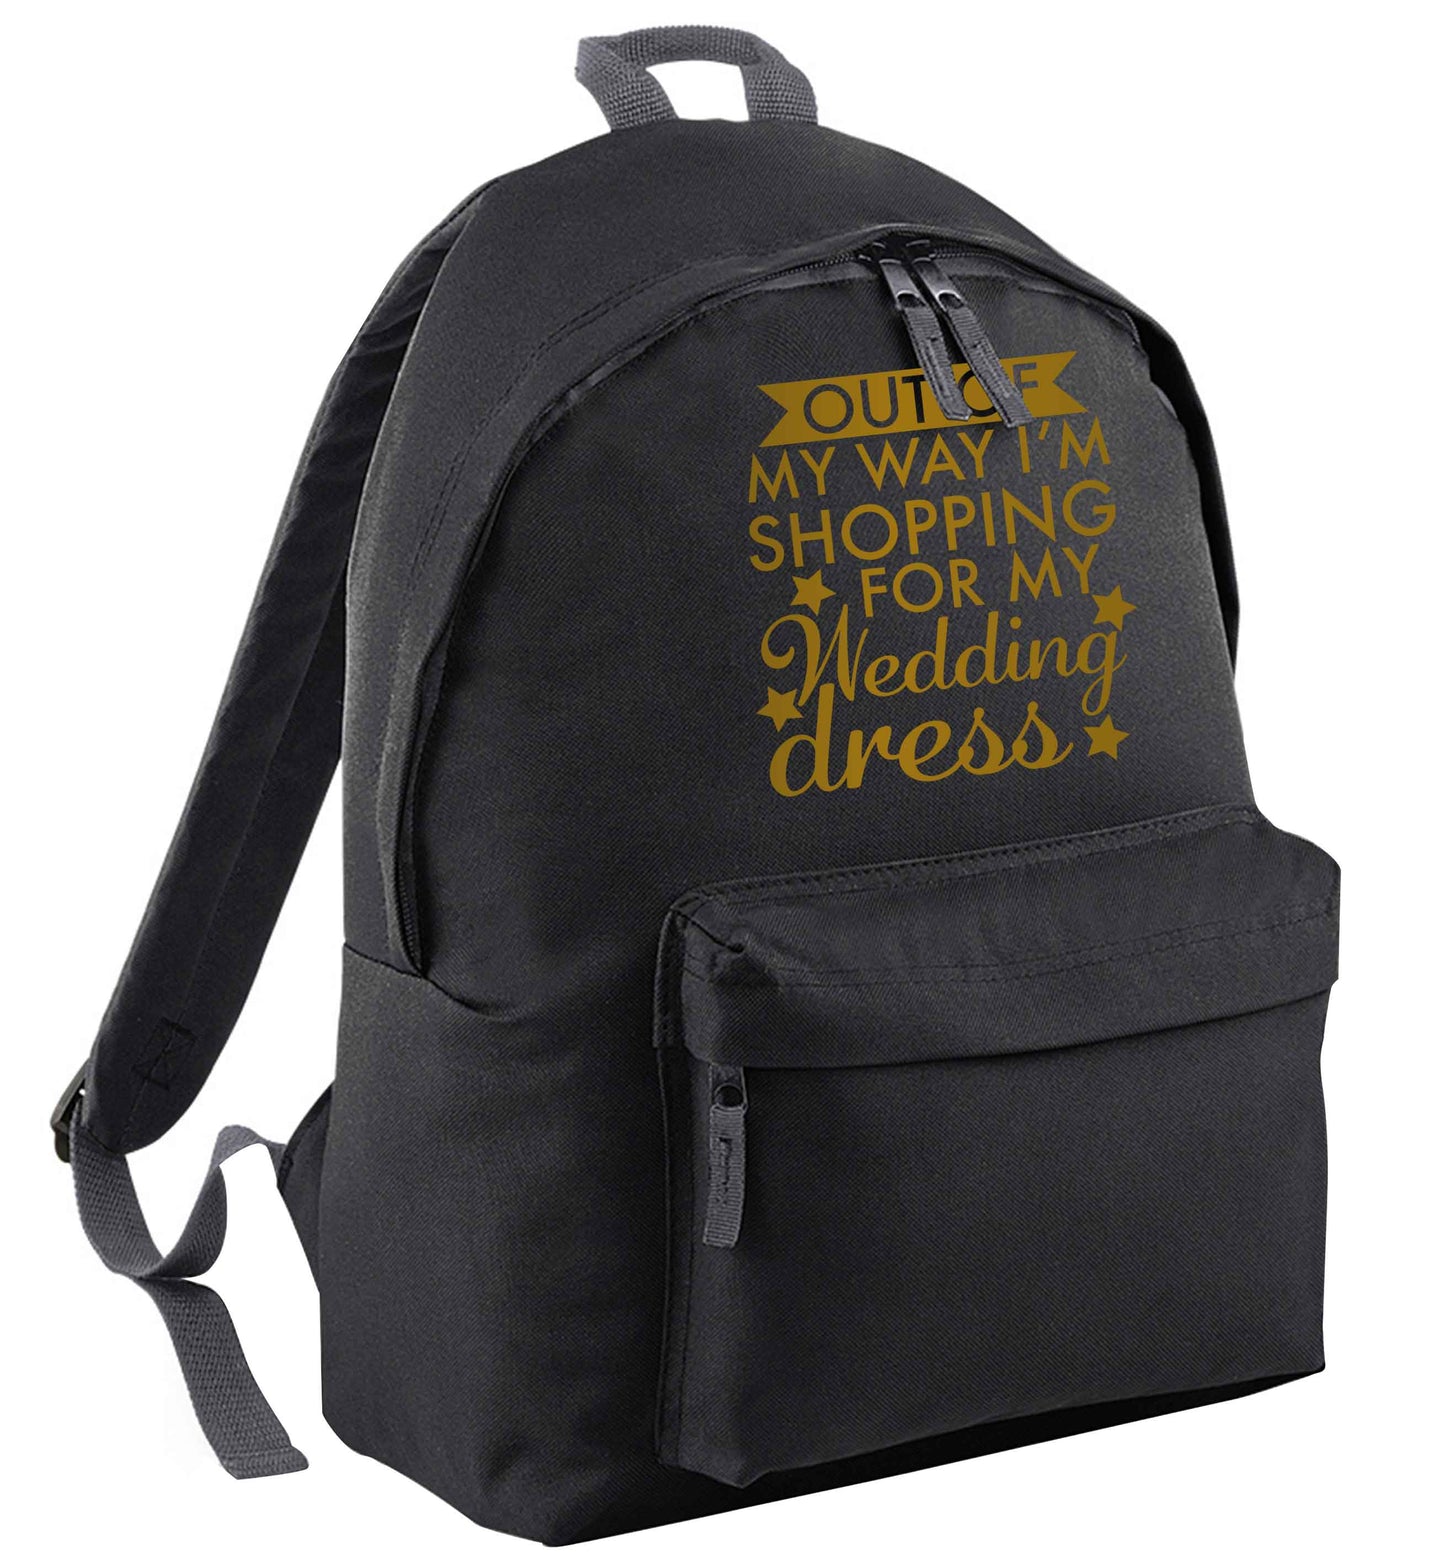 Out of my way I'm shopping for my wedding dress black adults backpack